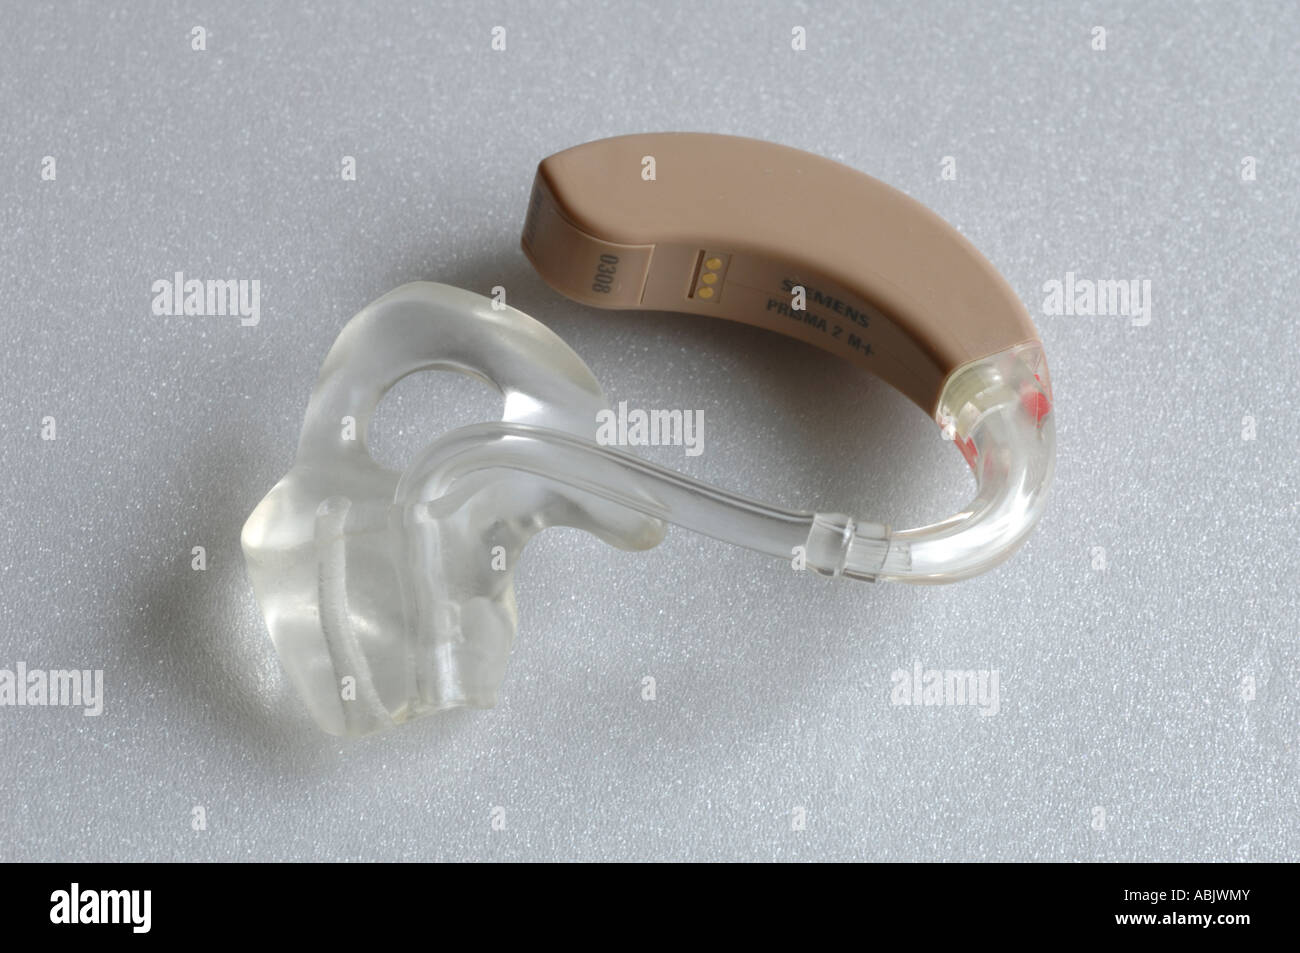 Siemens behind the ear hearing aid and ear mould Stock Photo - Alamy